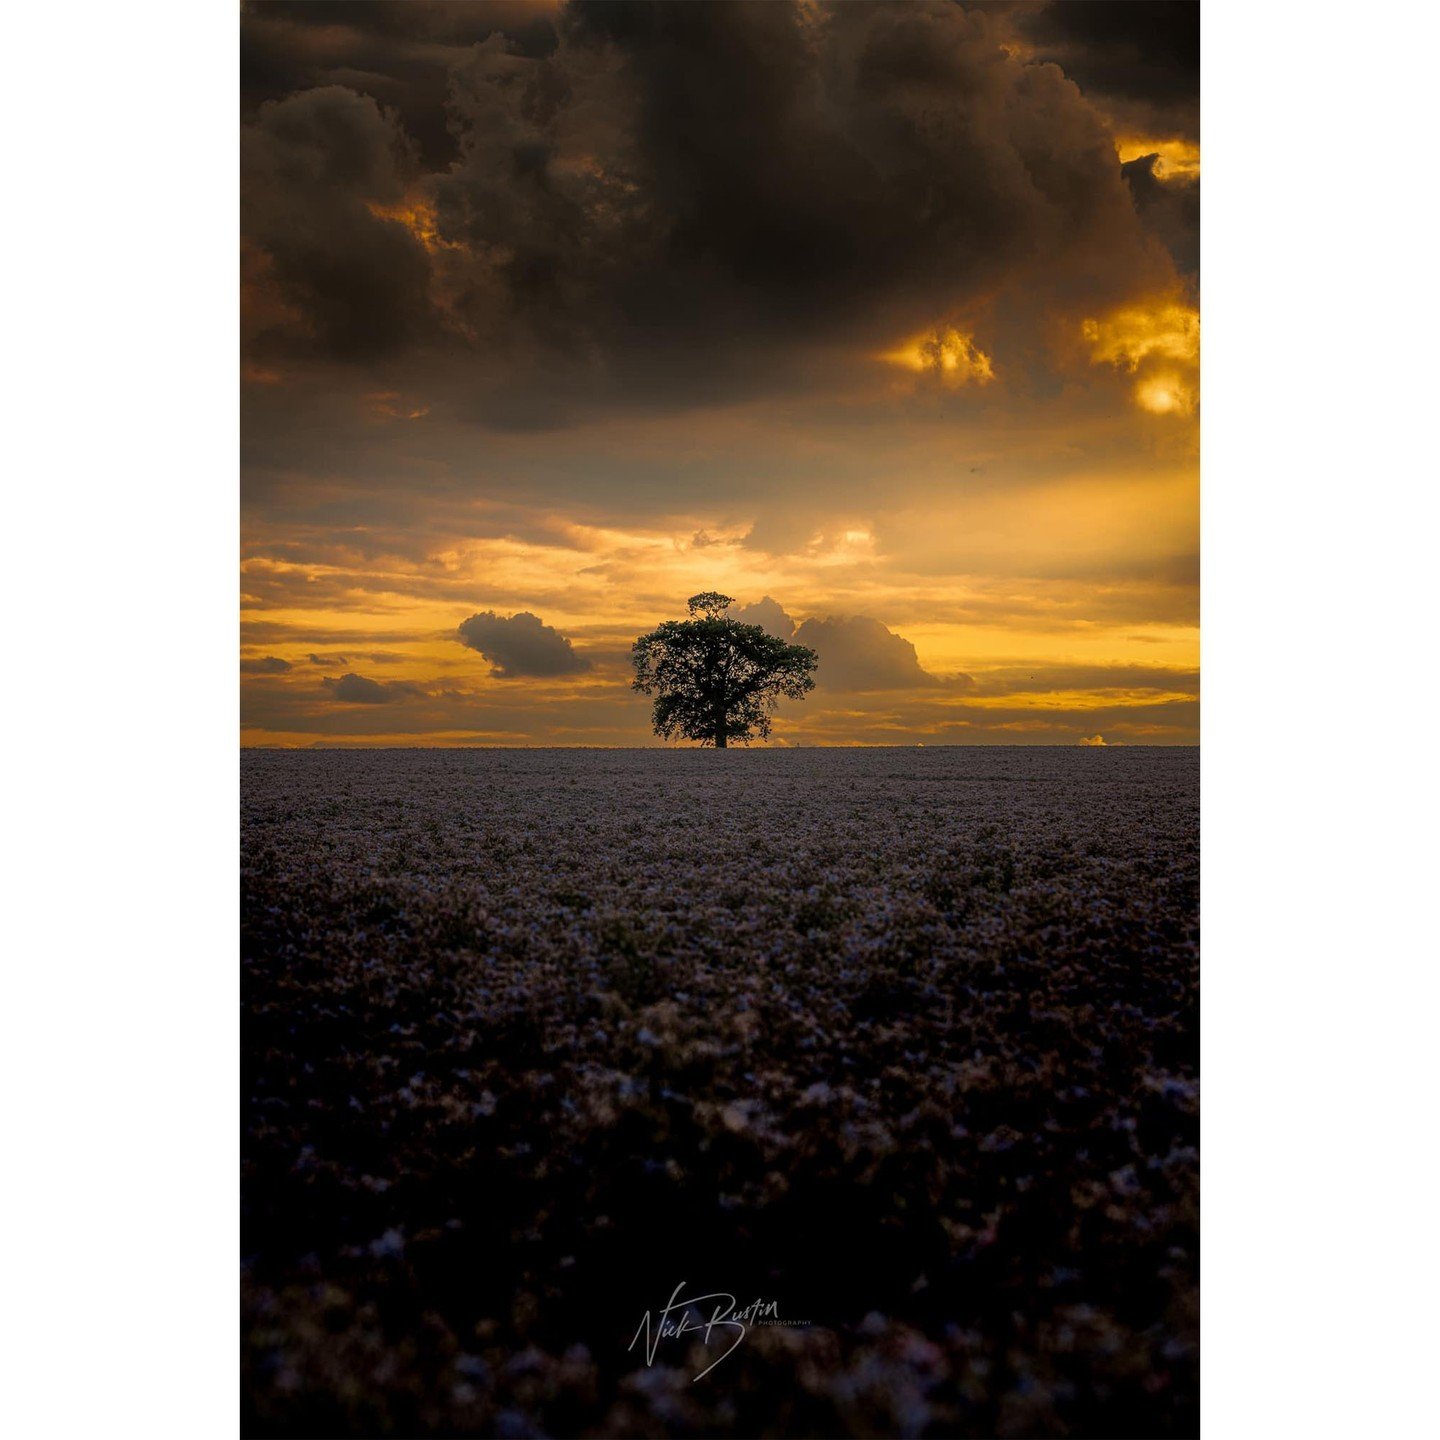 A truly wonderful photo that transports you right to where it was taken 😍👏

Taken by member Nick Bustin @nickbustin 📸

Sony A7riii - F/5.6 - ISO 320

Nick writes, &quot;A lone tree amongst the borage. A shot from late summer 2023.&quot;

Love it ❤